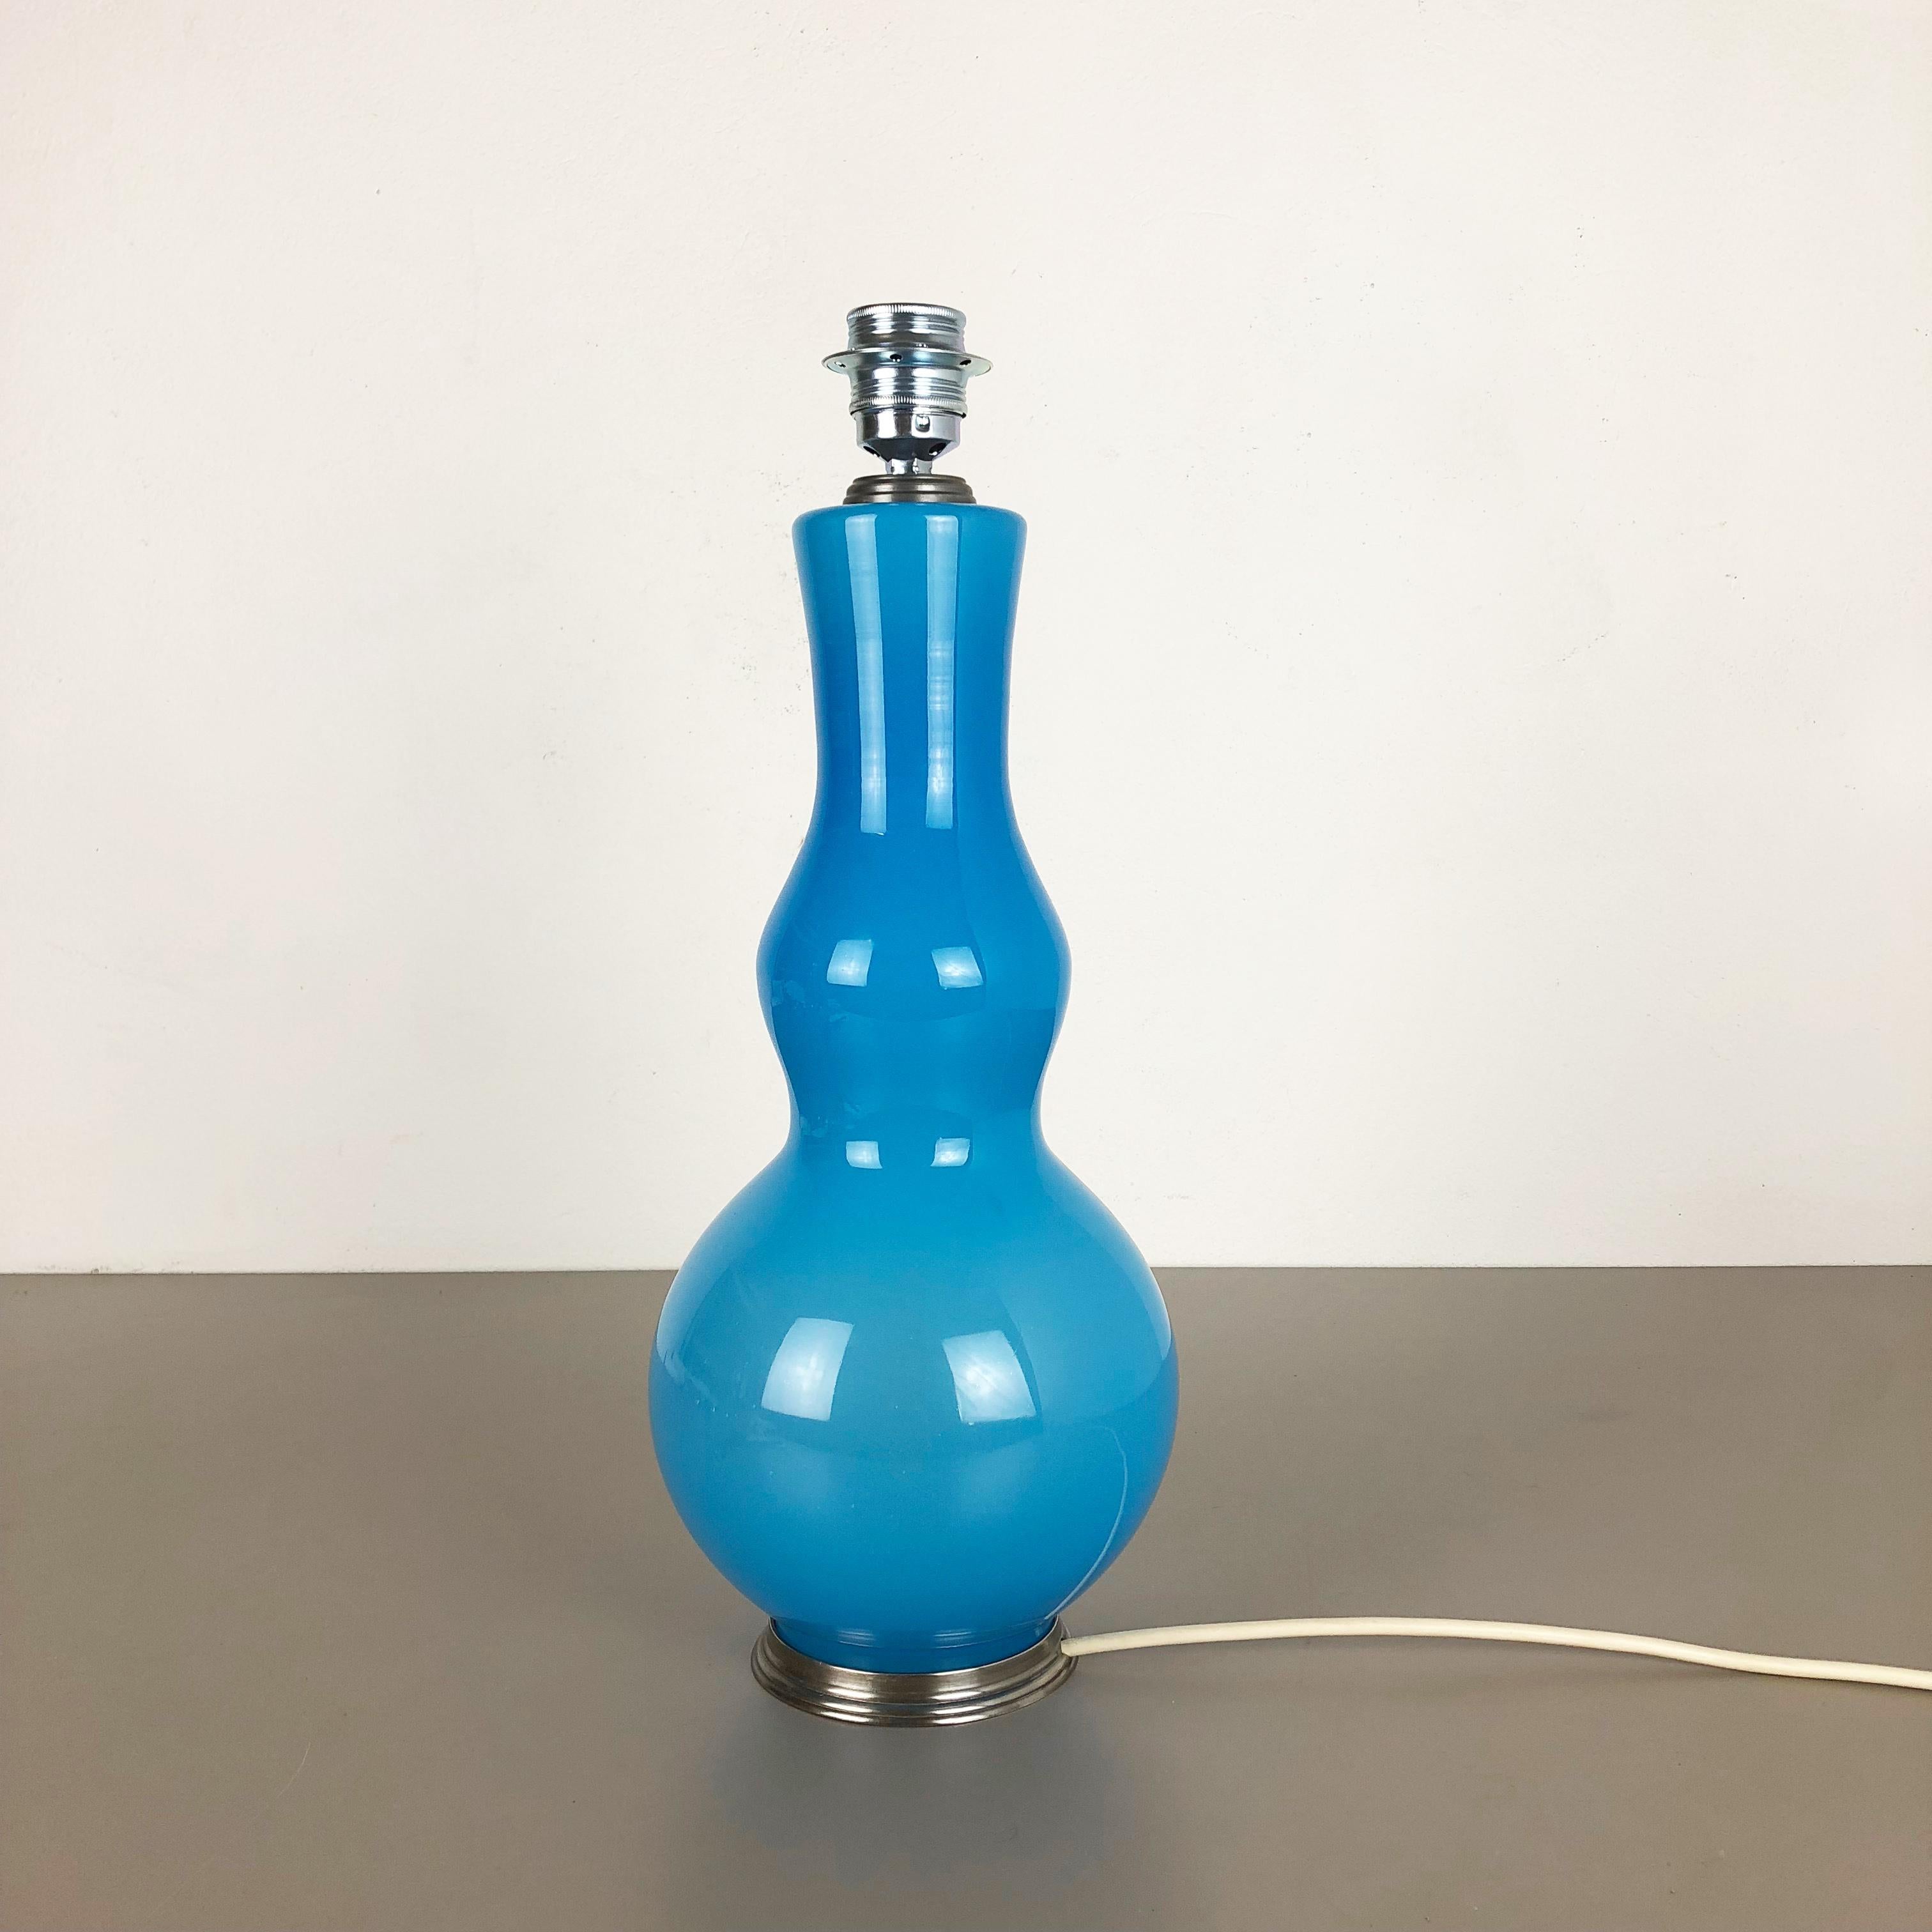 Article:

Table light opal Murano glass



Producer:

Cenedese Vetri


Origin:

Murano, Italy


Age:

1960s



This fantastic vintage table light was designed and produced by Cenedese Vetri in the 1960s in Murano, Italy. The